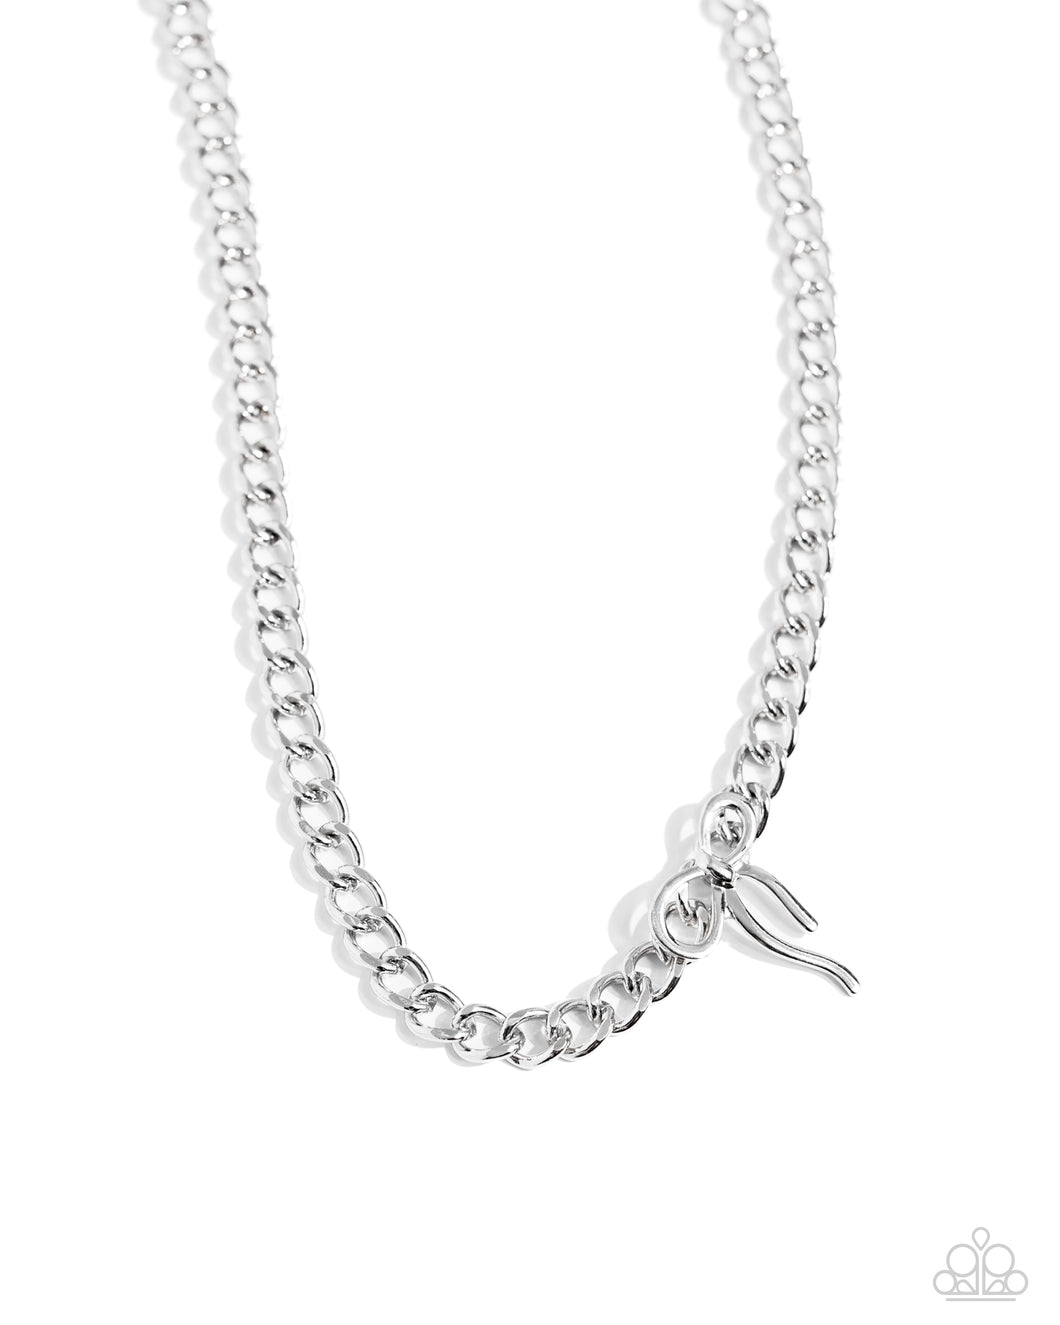 Leading Loops - Silver (Bow) Necklace